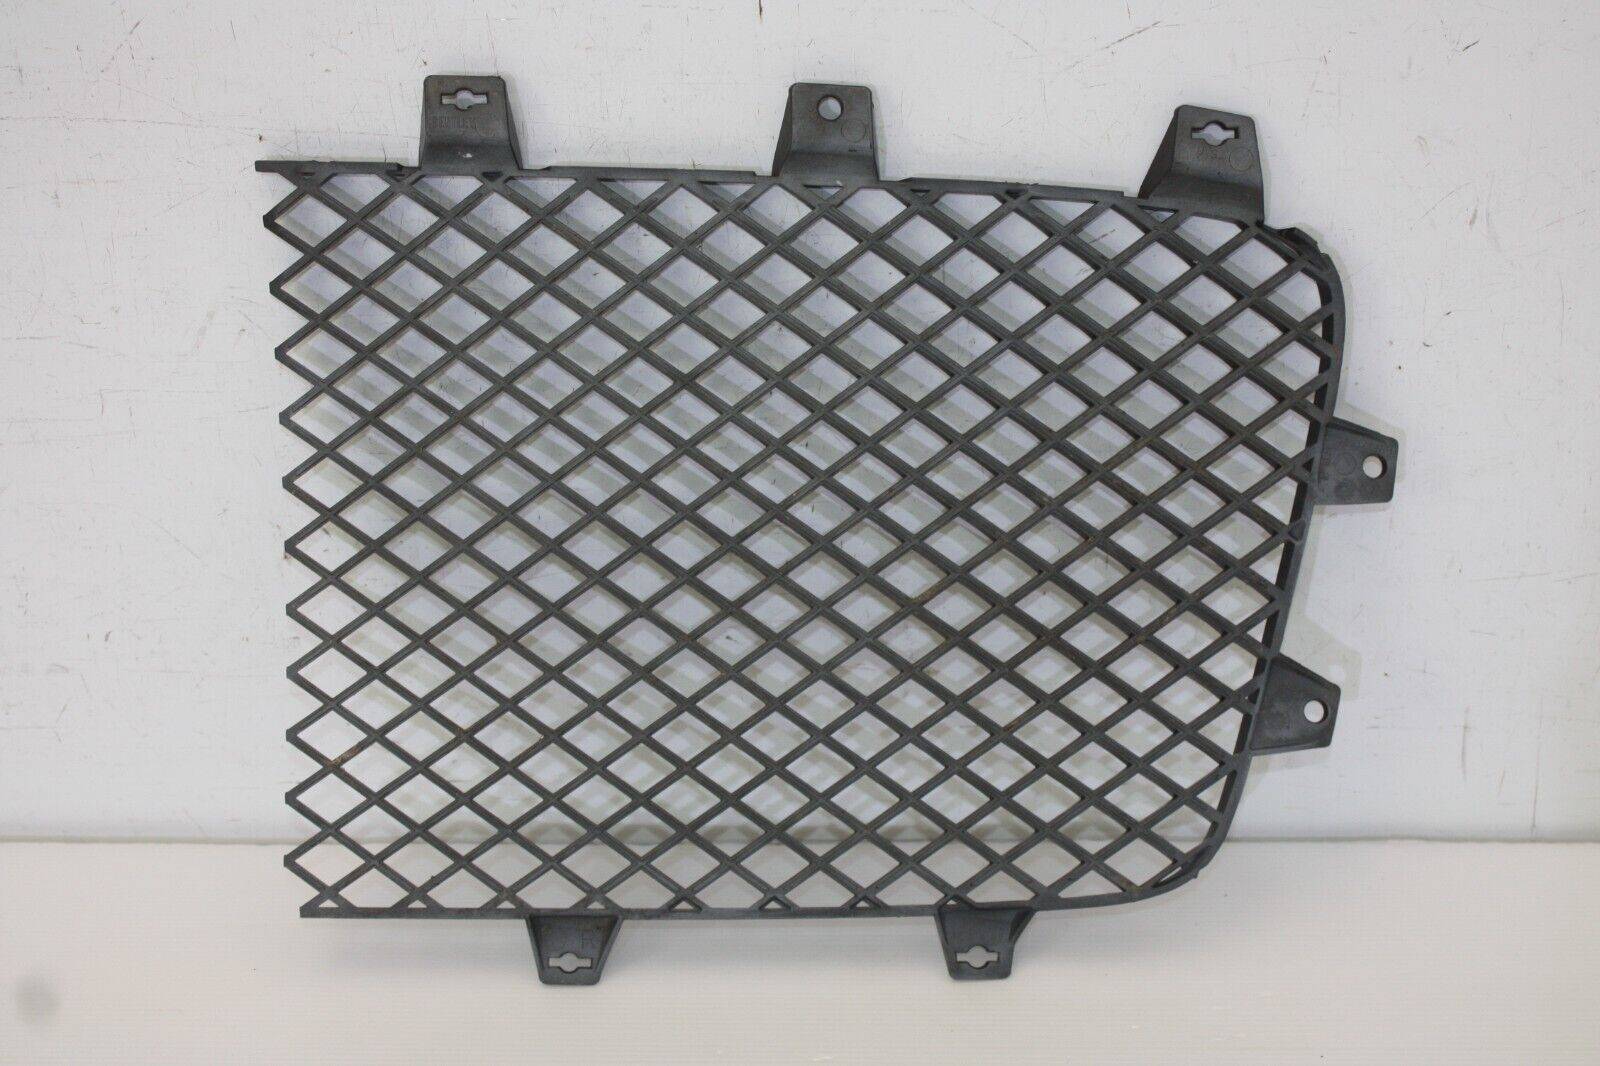 Bentley-Continental-GT-GTC-Front-Bumper-Right-Radiator-Grill-3W3853684-Genuine-175561195275-6